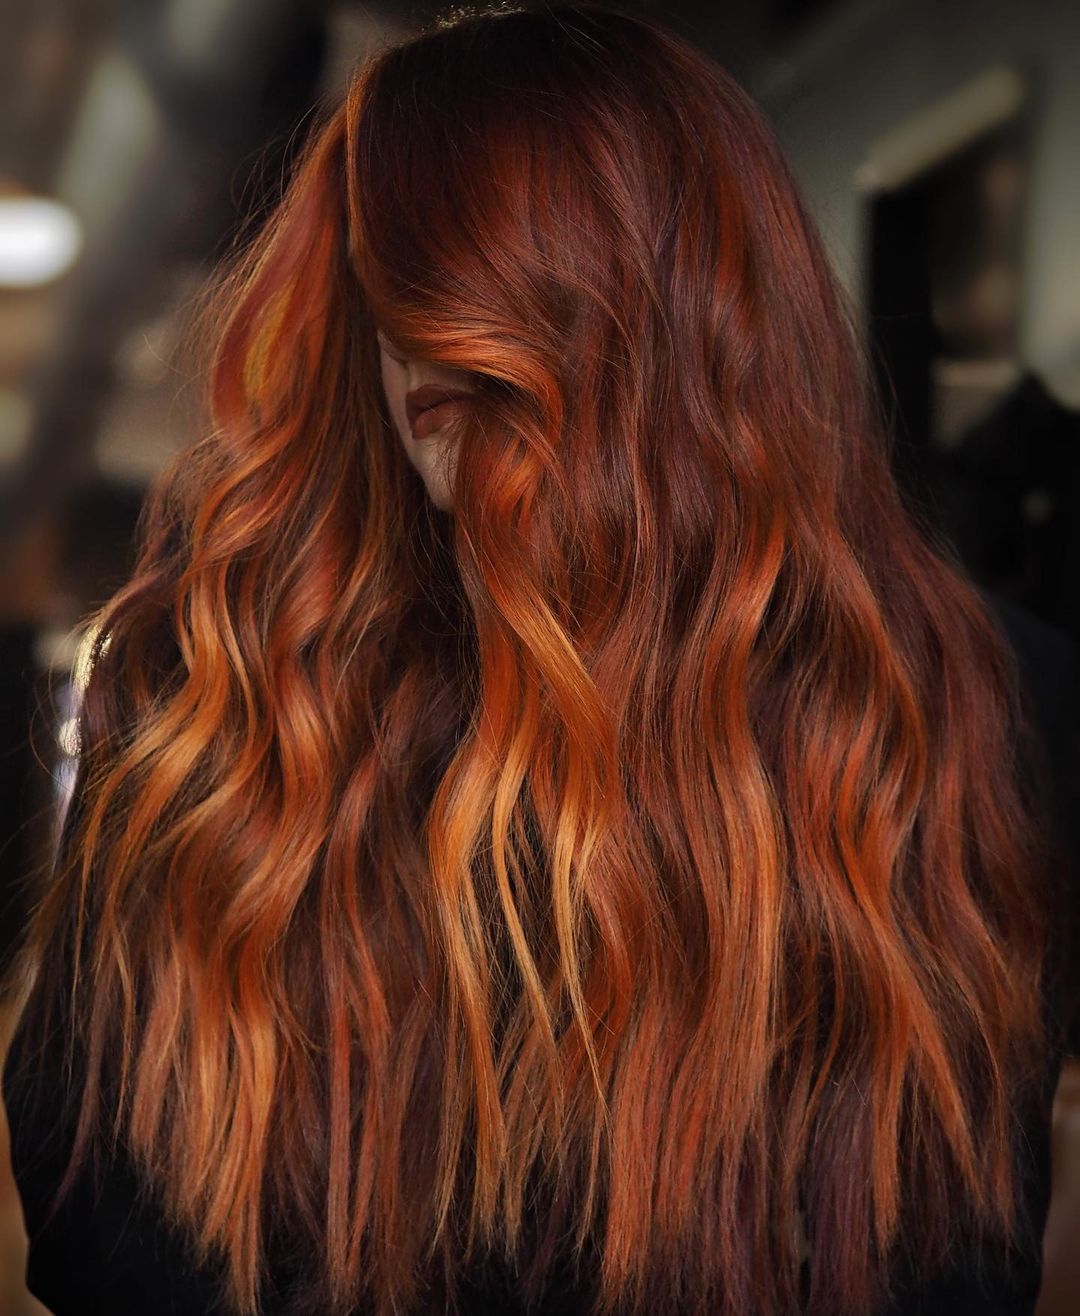 Long Red Hair with Orange Highlights